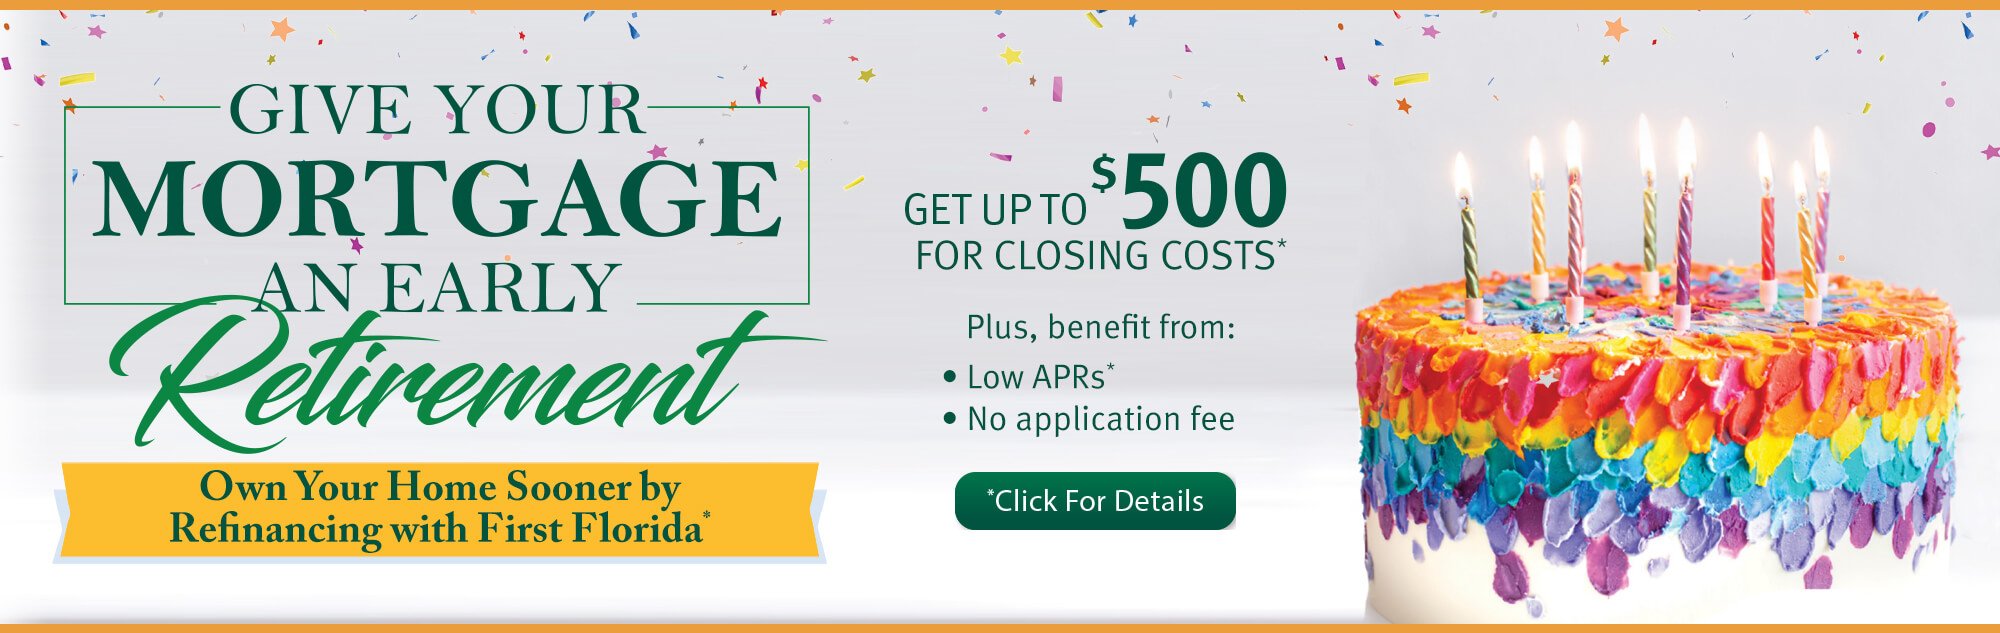 Give your mortgage an early retirement. Own your home sooner by refinancing with first florida. Get up to $500 for closing costs. PLus benefit from: Low APRs, No application fee. Click for details.